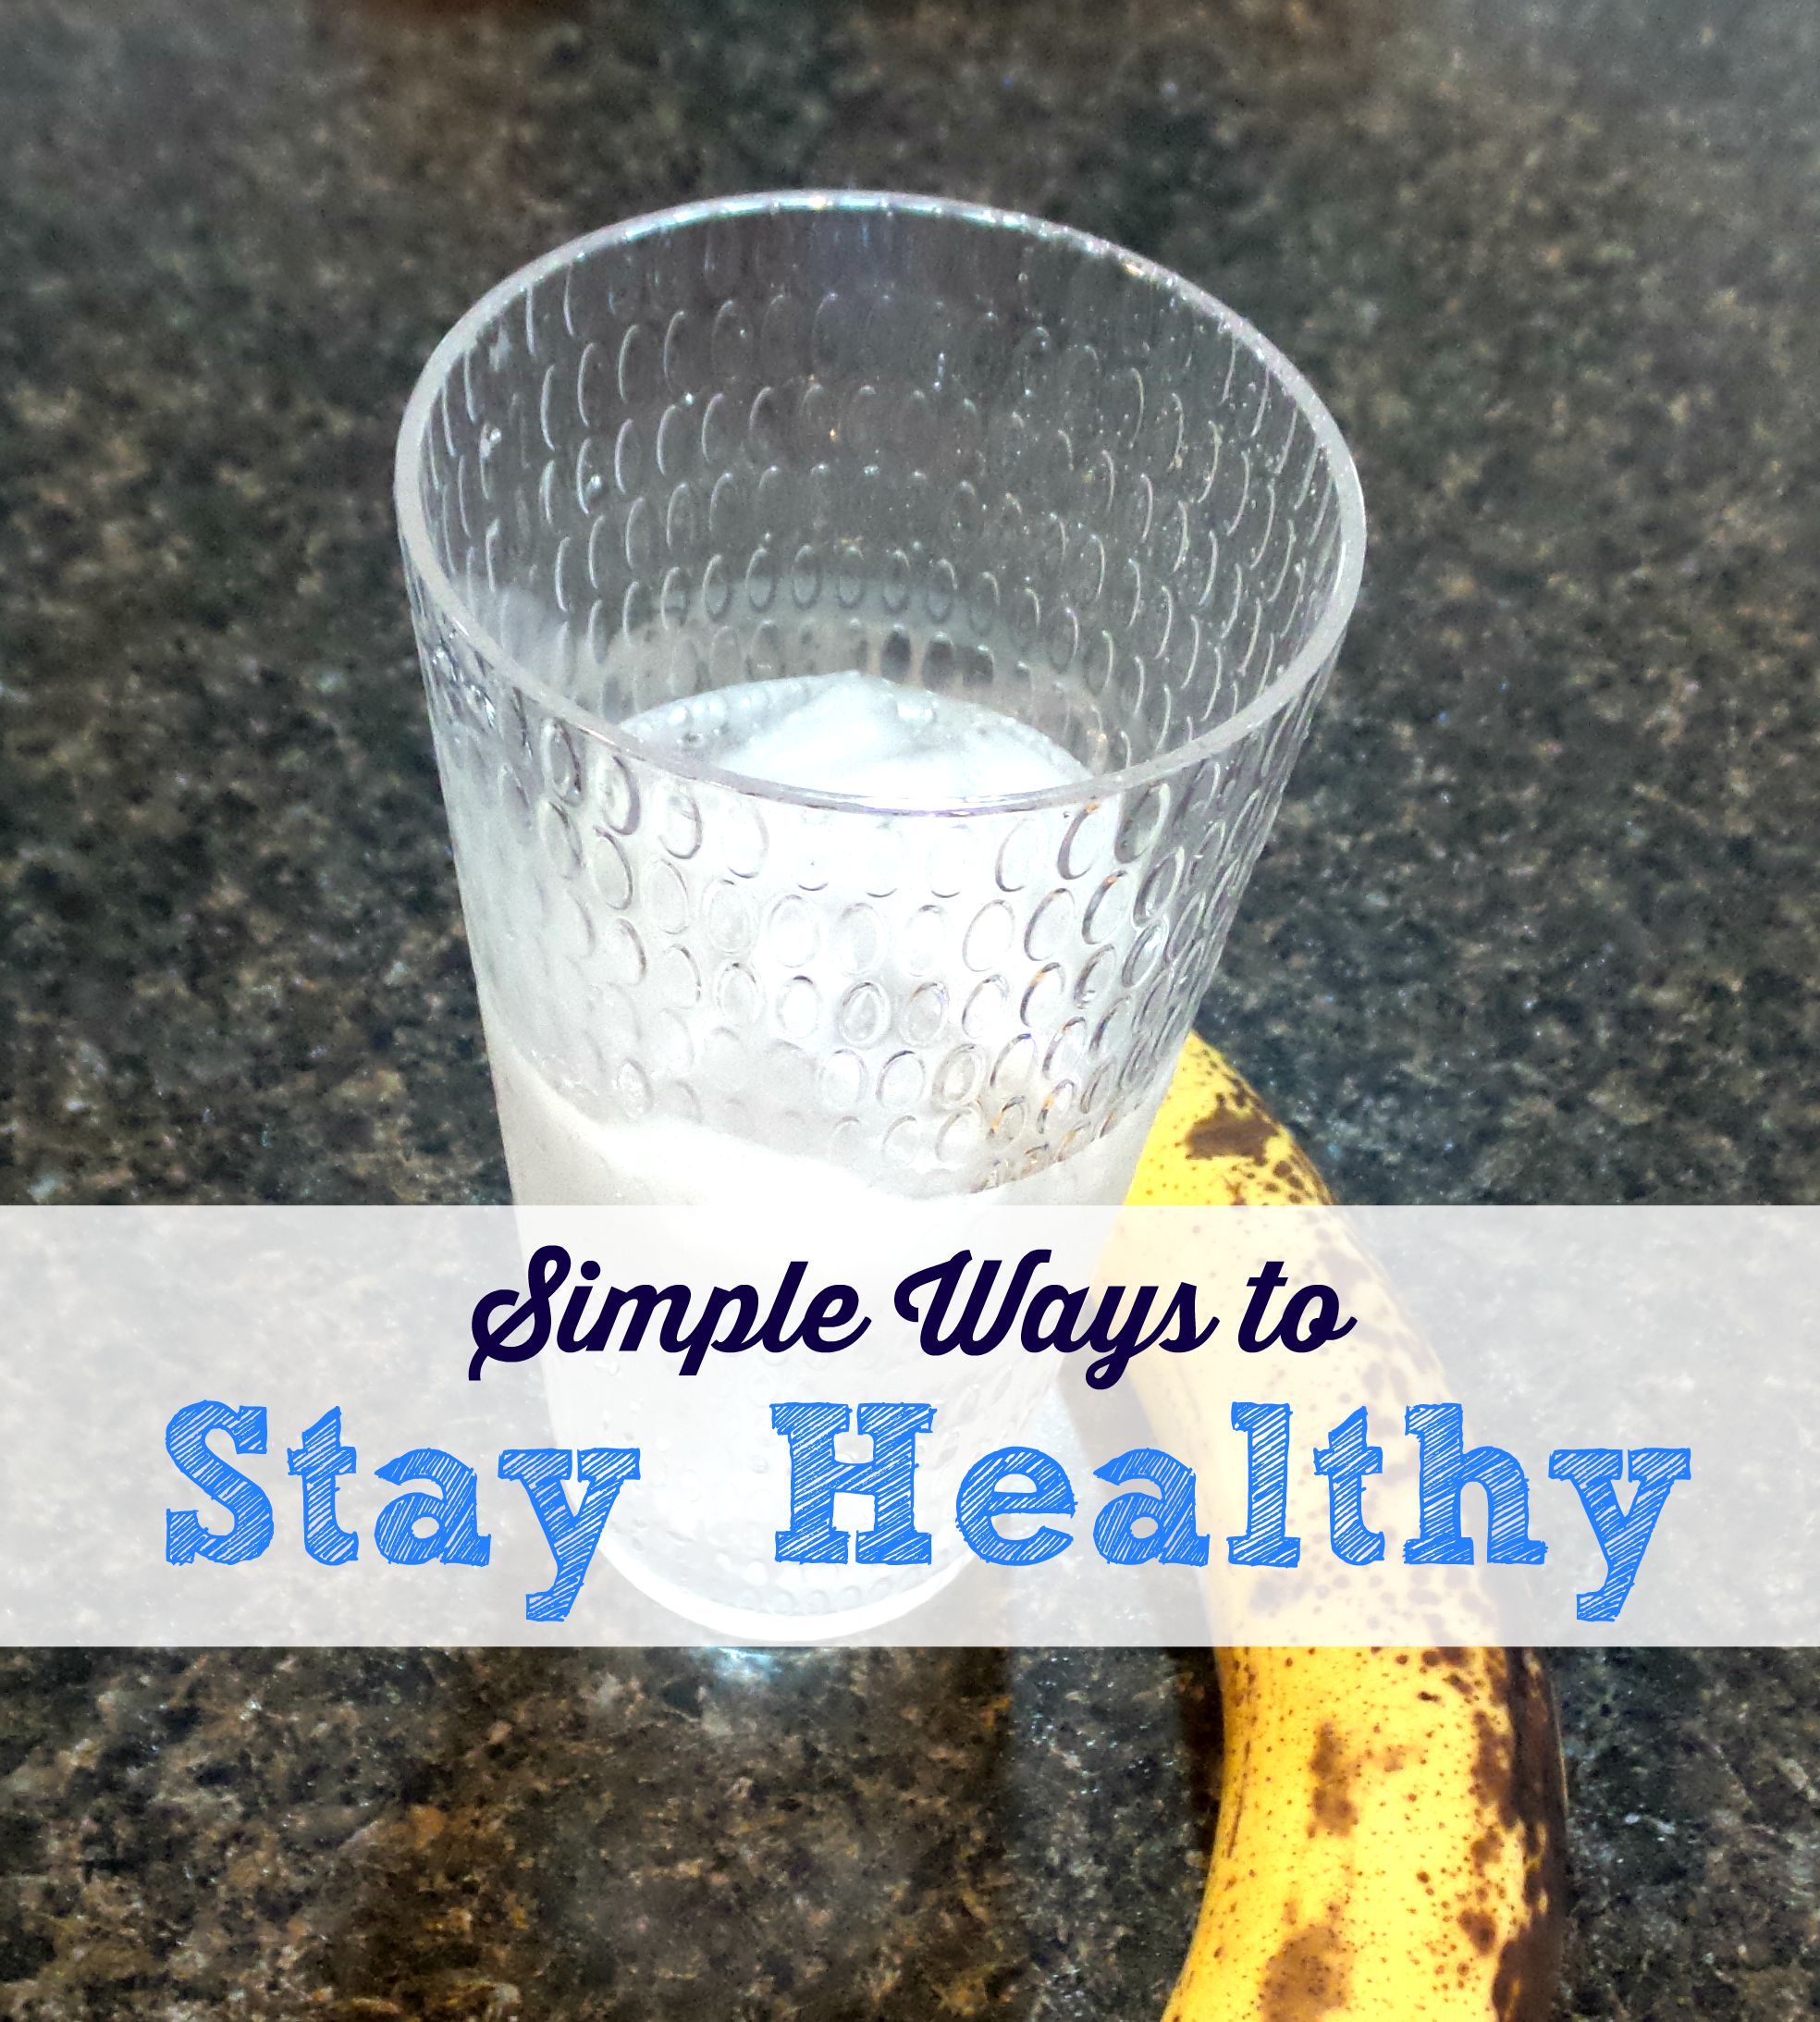 Simple Ways to Stay Healthy